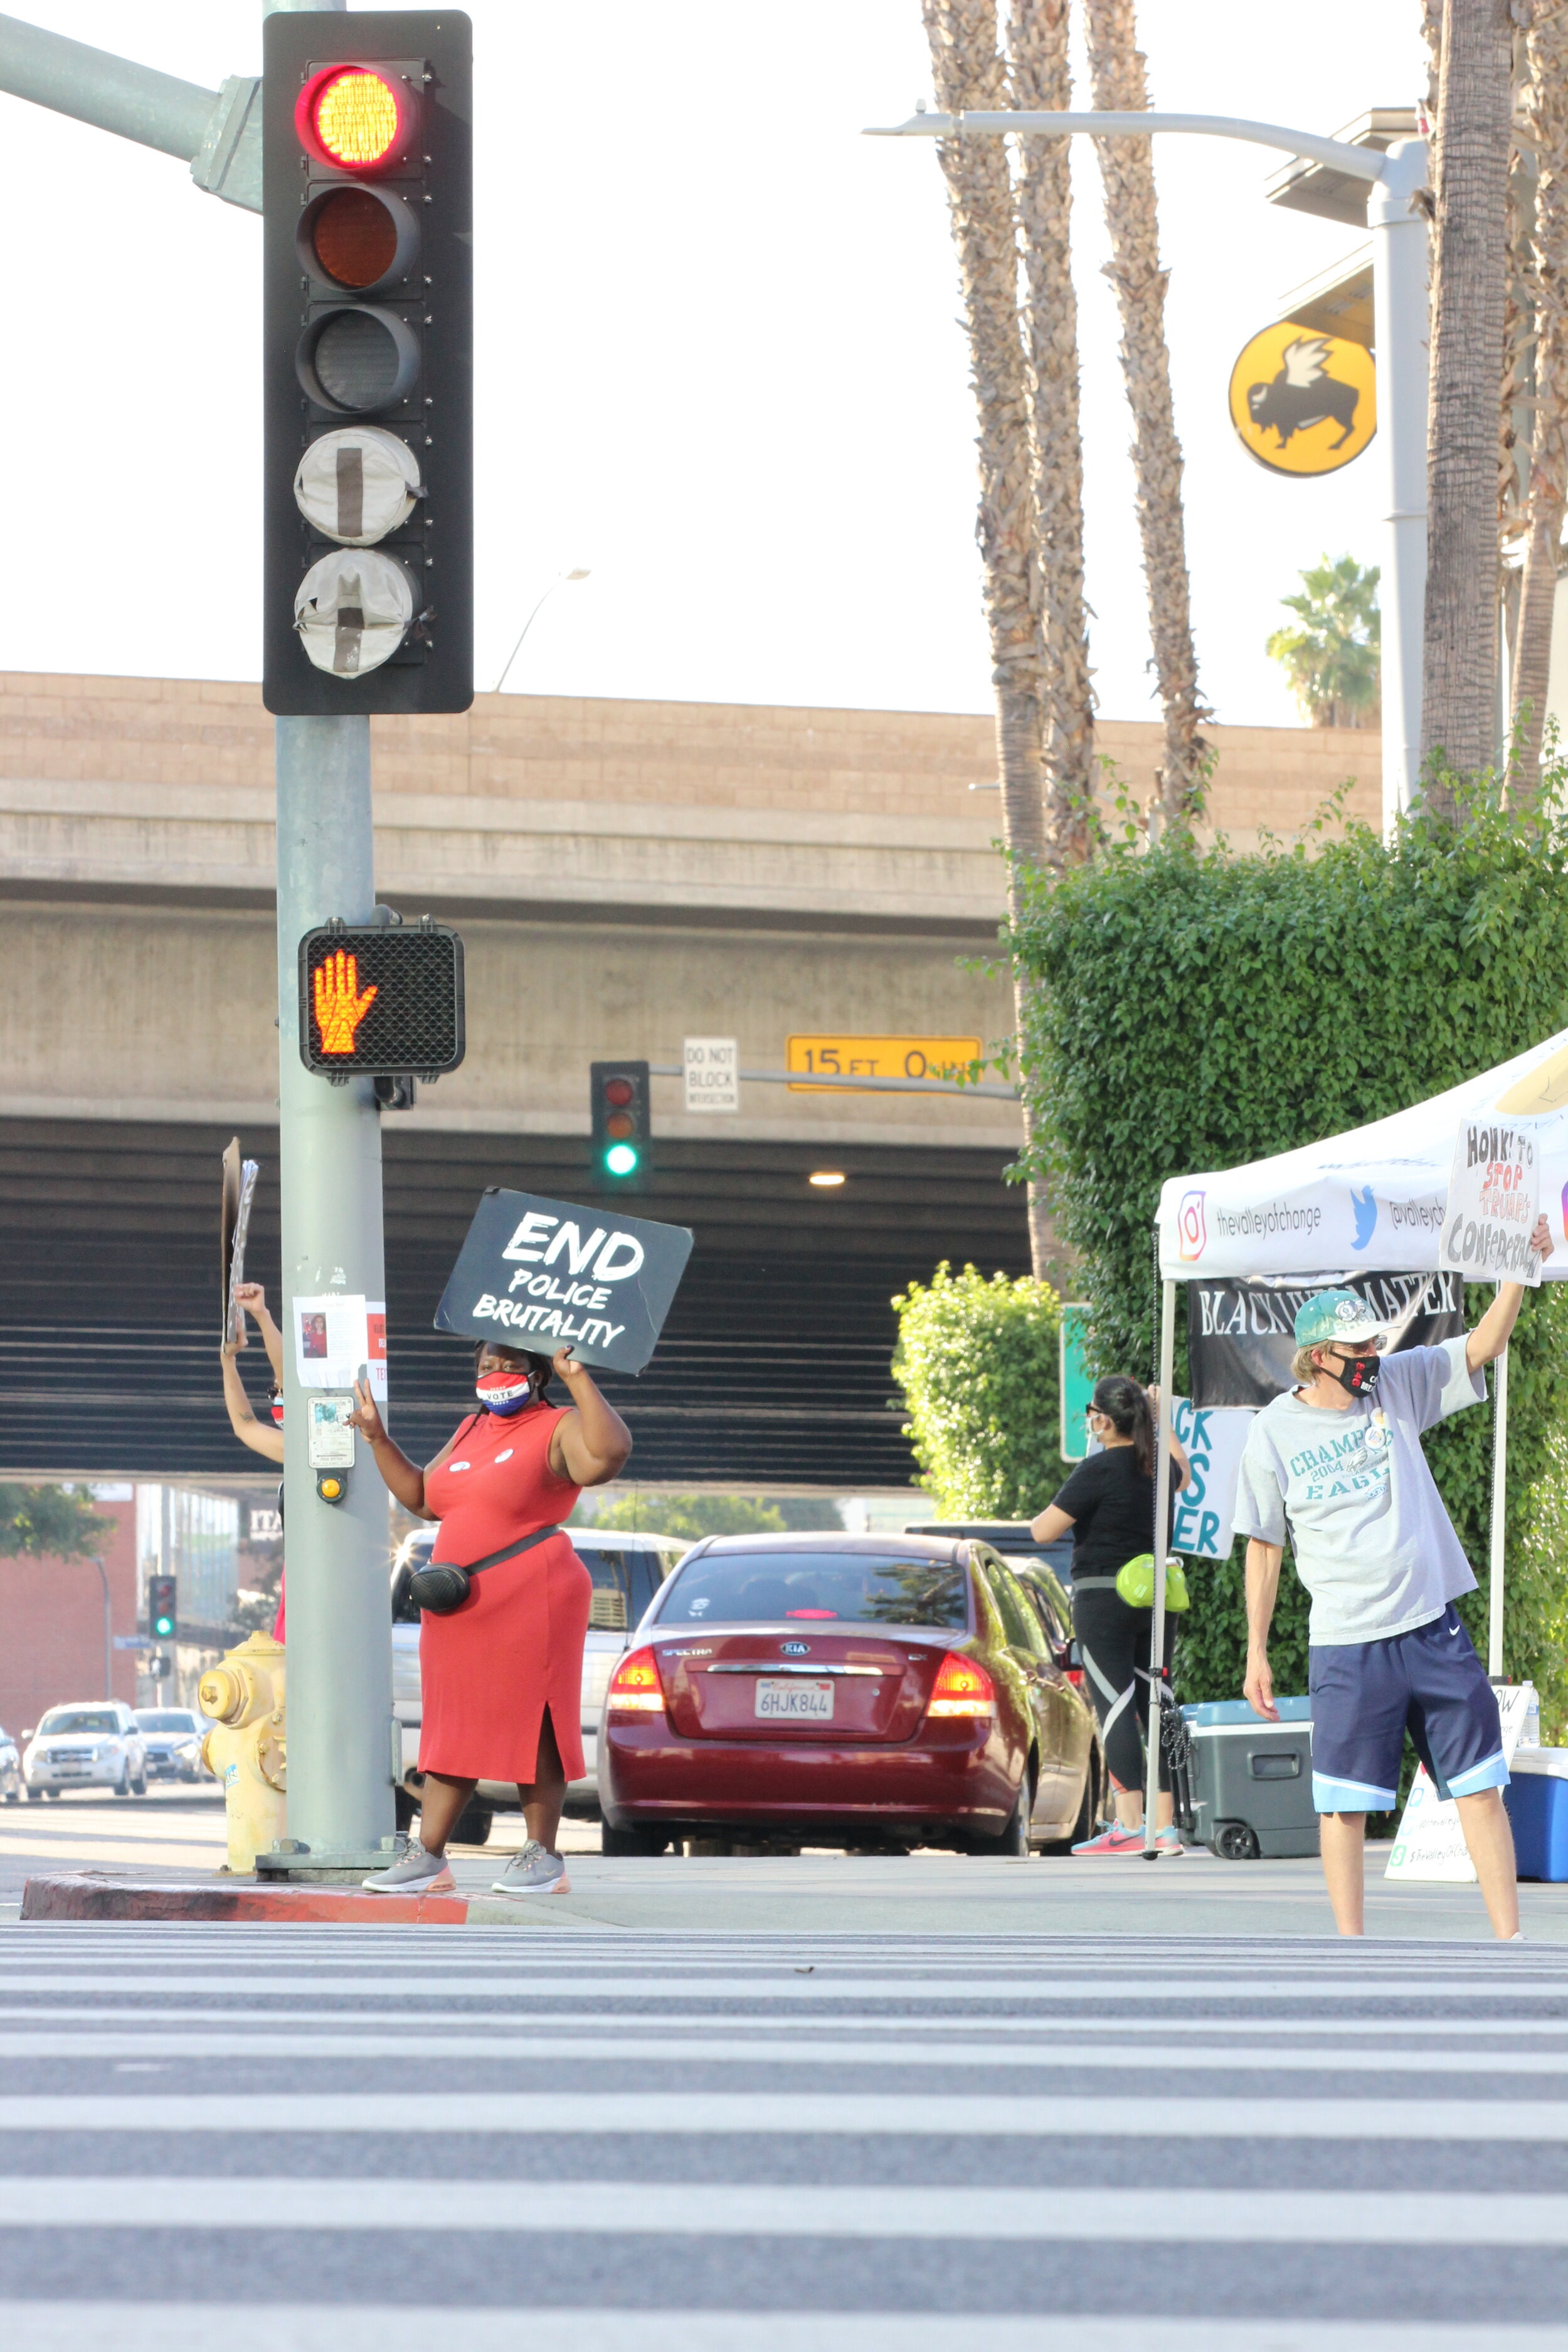   Latoria Green gives out a peace sign to cars as they drive by the corner of Sepulveda Blvd. and Ventura Blvd. in Sherman Oaks, Calif. on Nov. 1, 2020. (Carolyn Burt / The Corsair)  